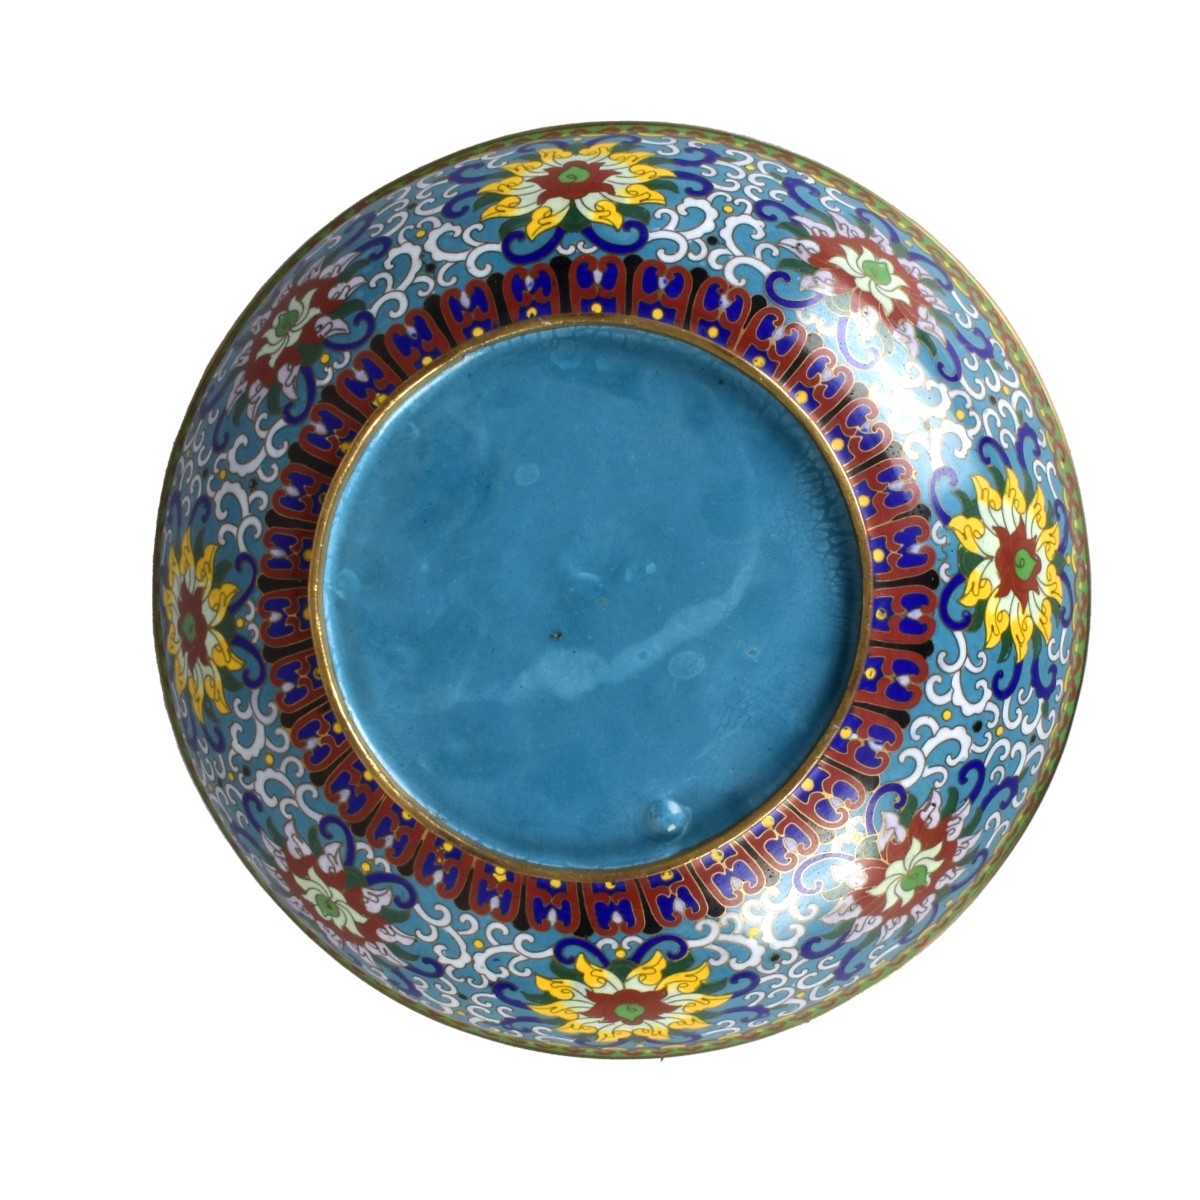 Chinese Cloisonne Covered Box